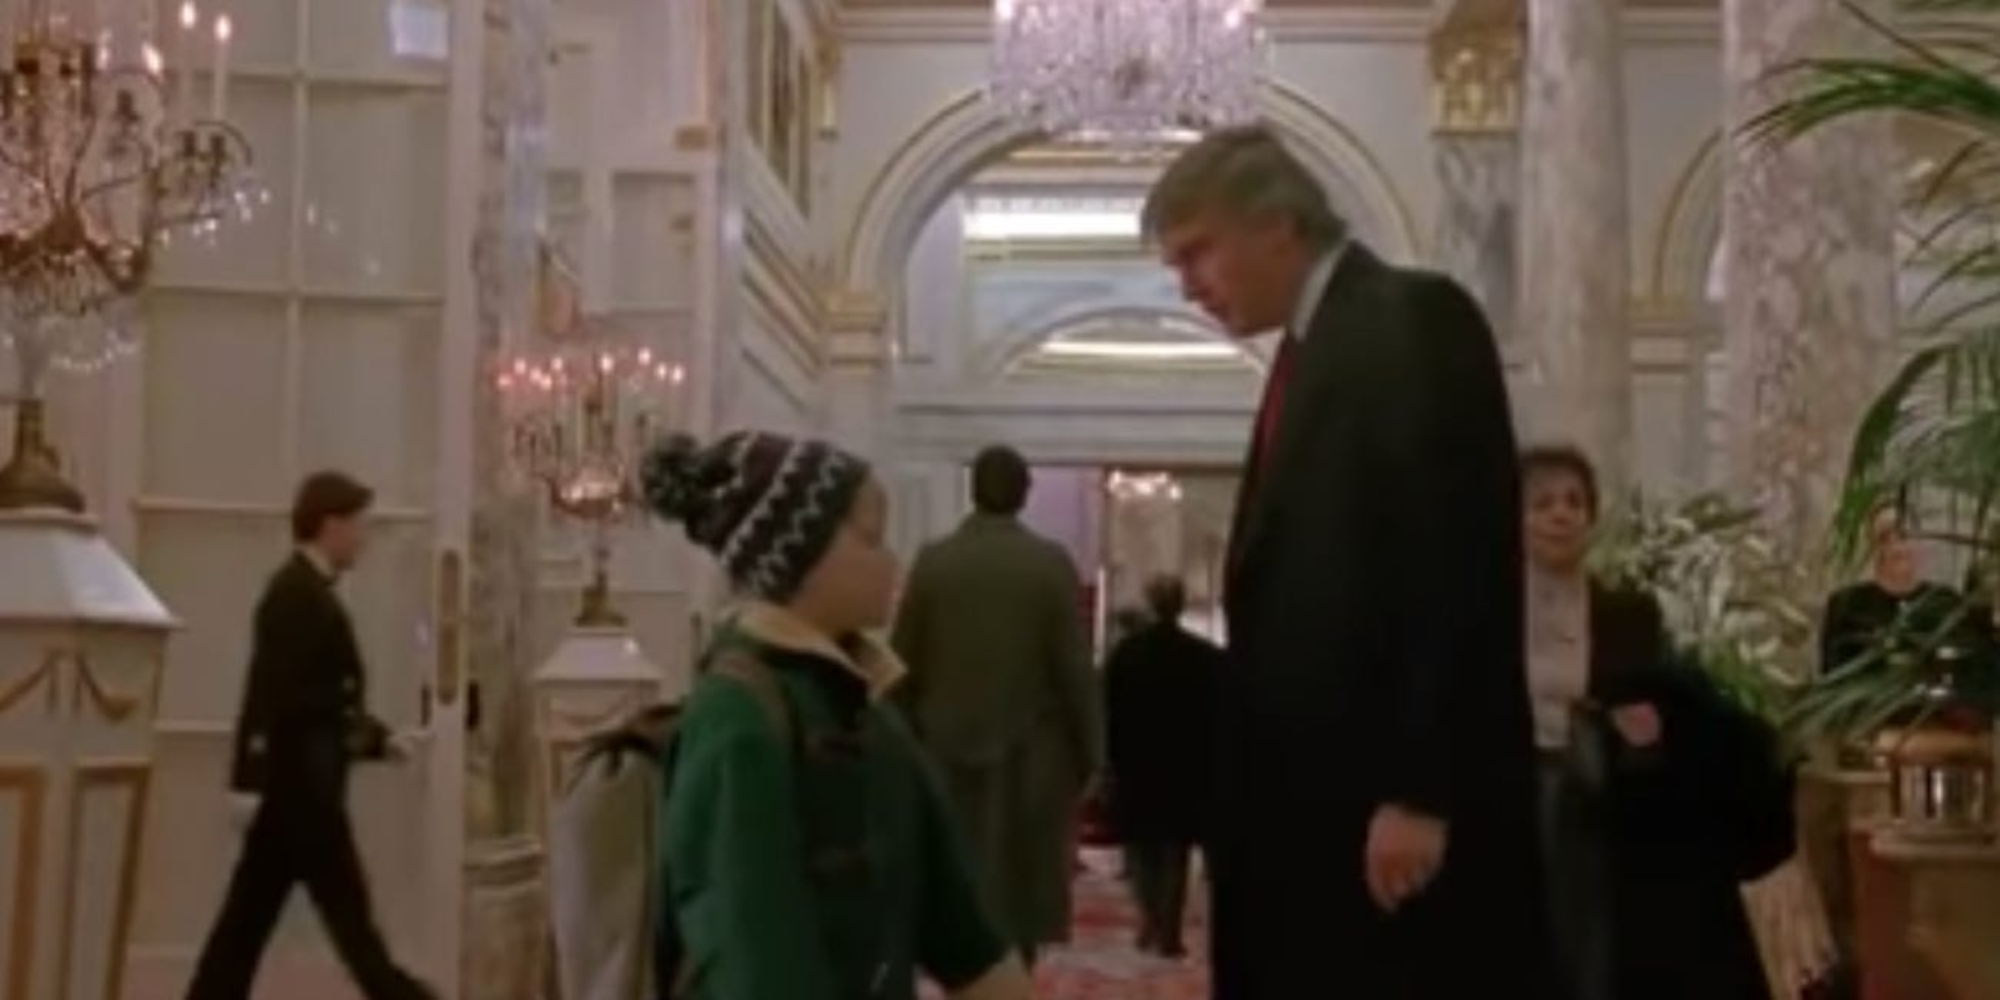 Trump 'bullied' his way into a cameo role in Home Alone 2, director says